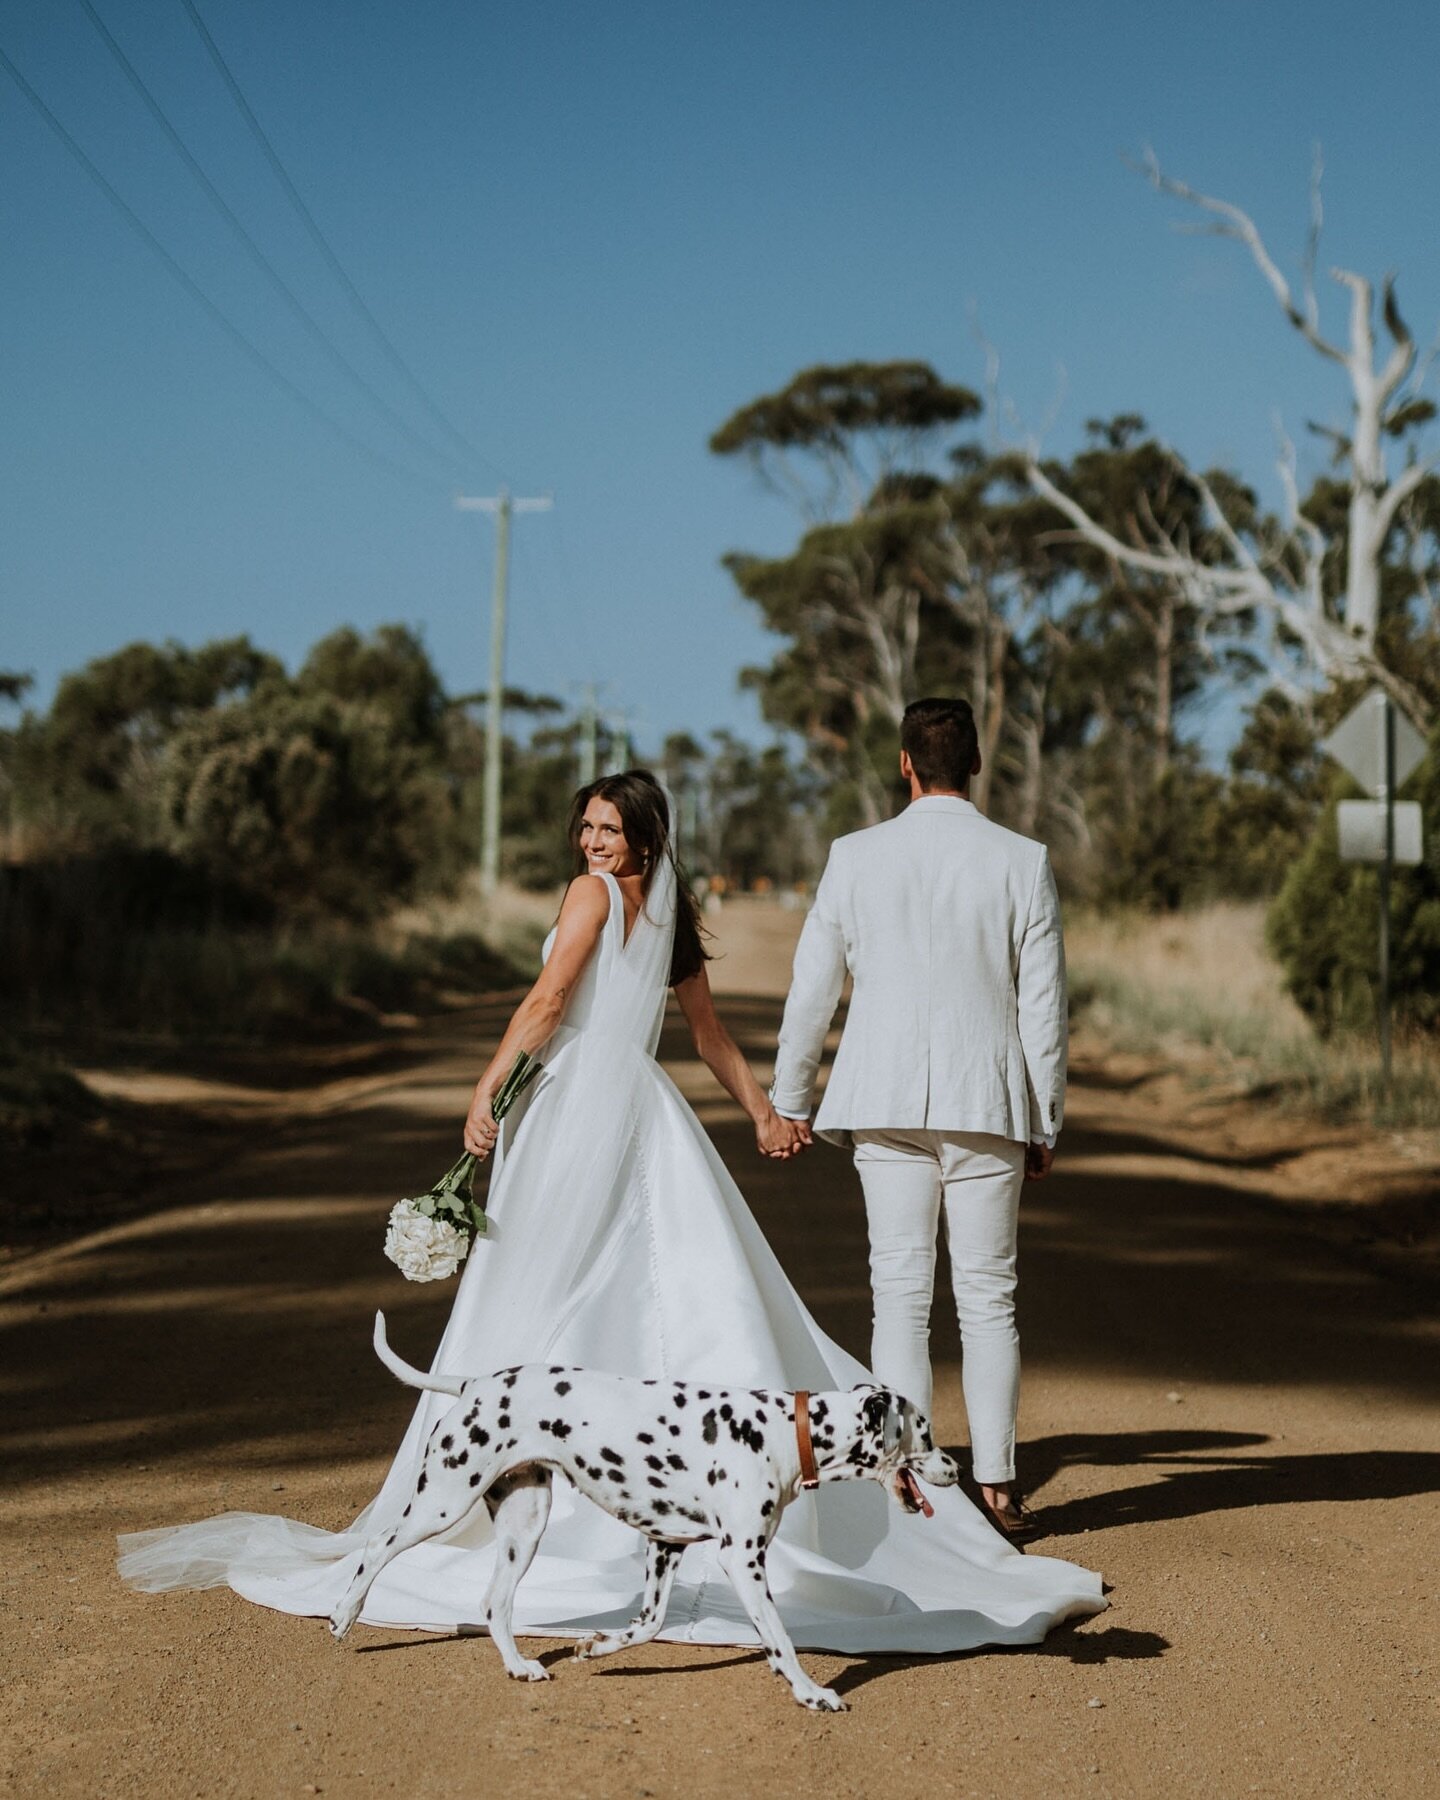 It&rsquo;s great Janelle and Josh could join for their Dalmatian&rsquo;s special day&hellip;

~

#tasmania #tasmaniawedding #tasmanianwedding #tasmanianweddingphotographer #marionbay